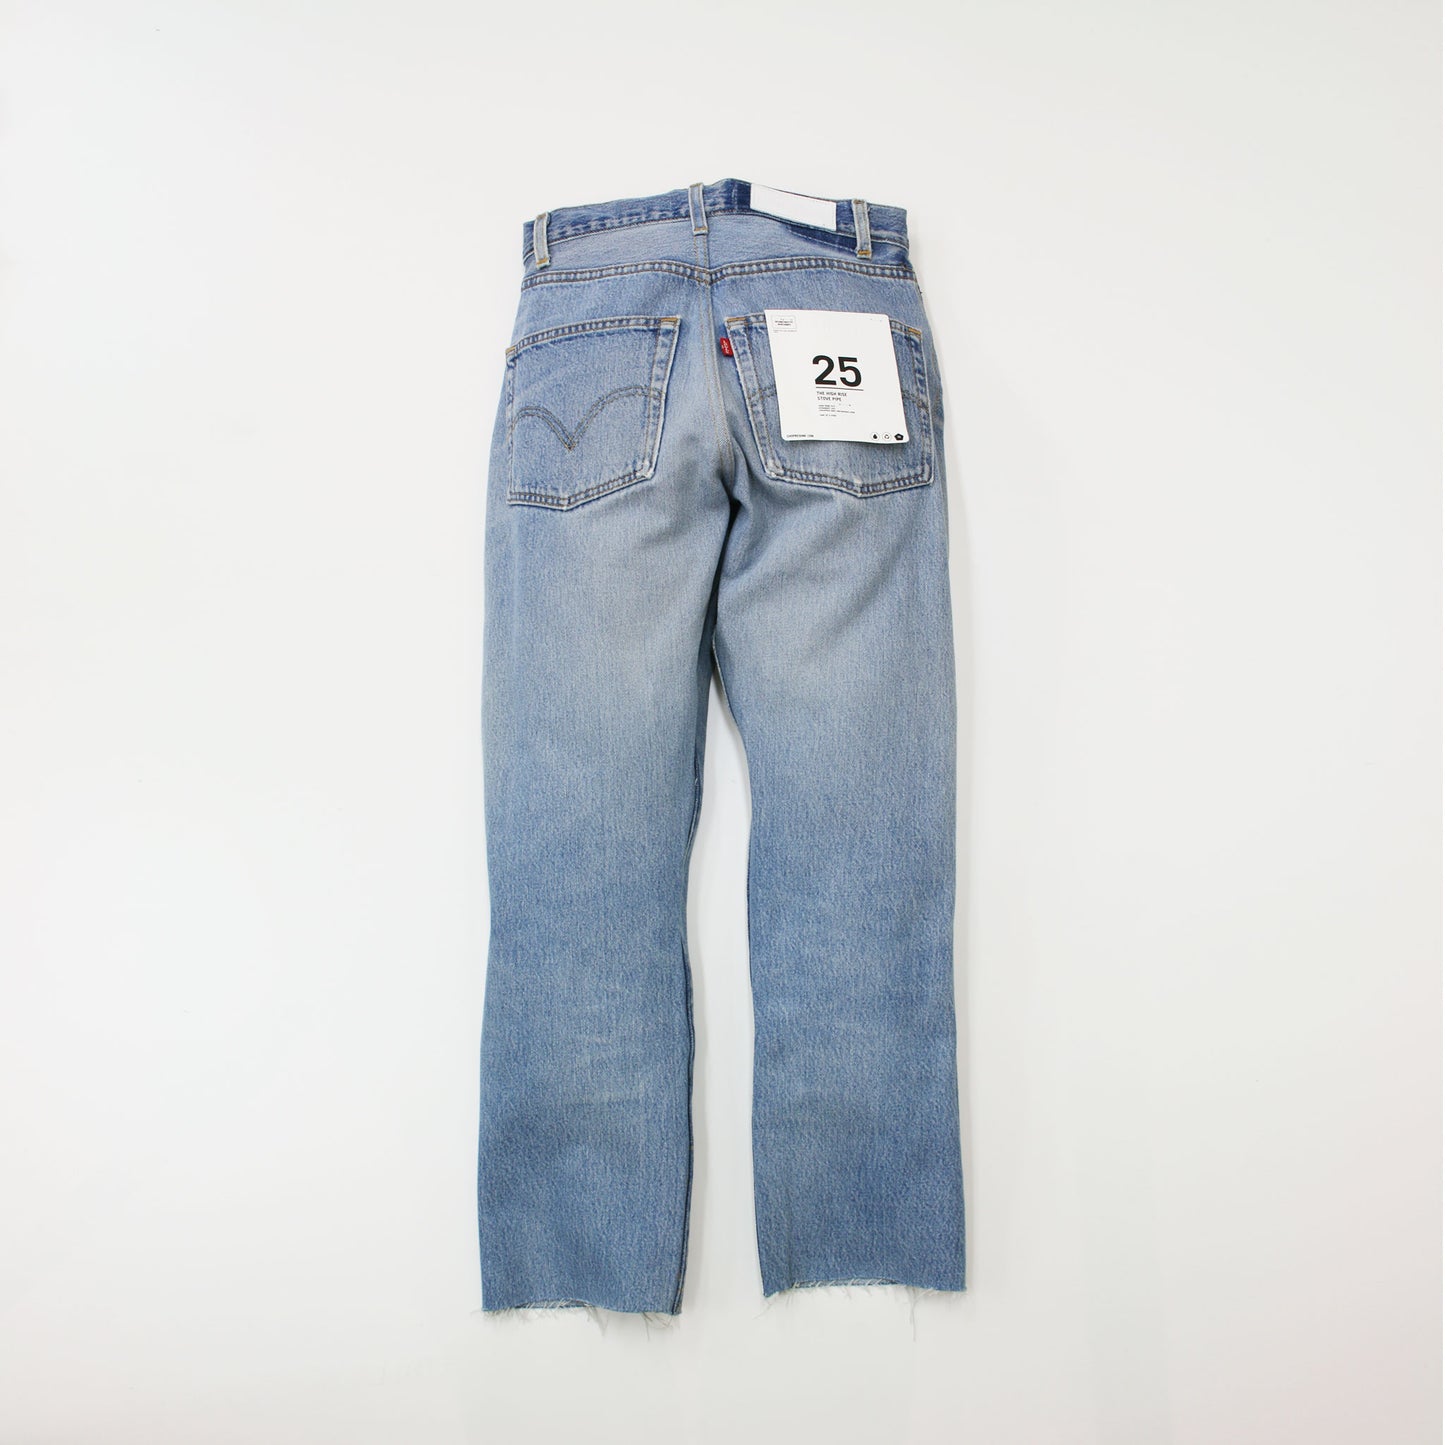 RE/DONE｜Levi's HIGH RISE STOVE PIPE size25B